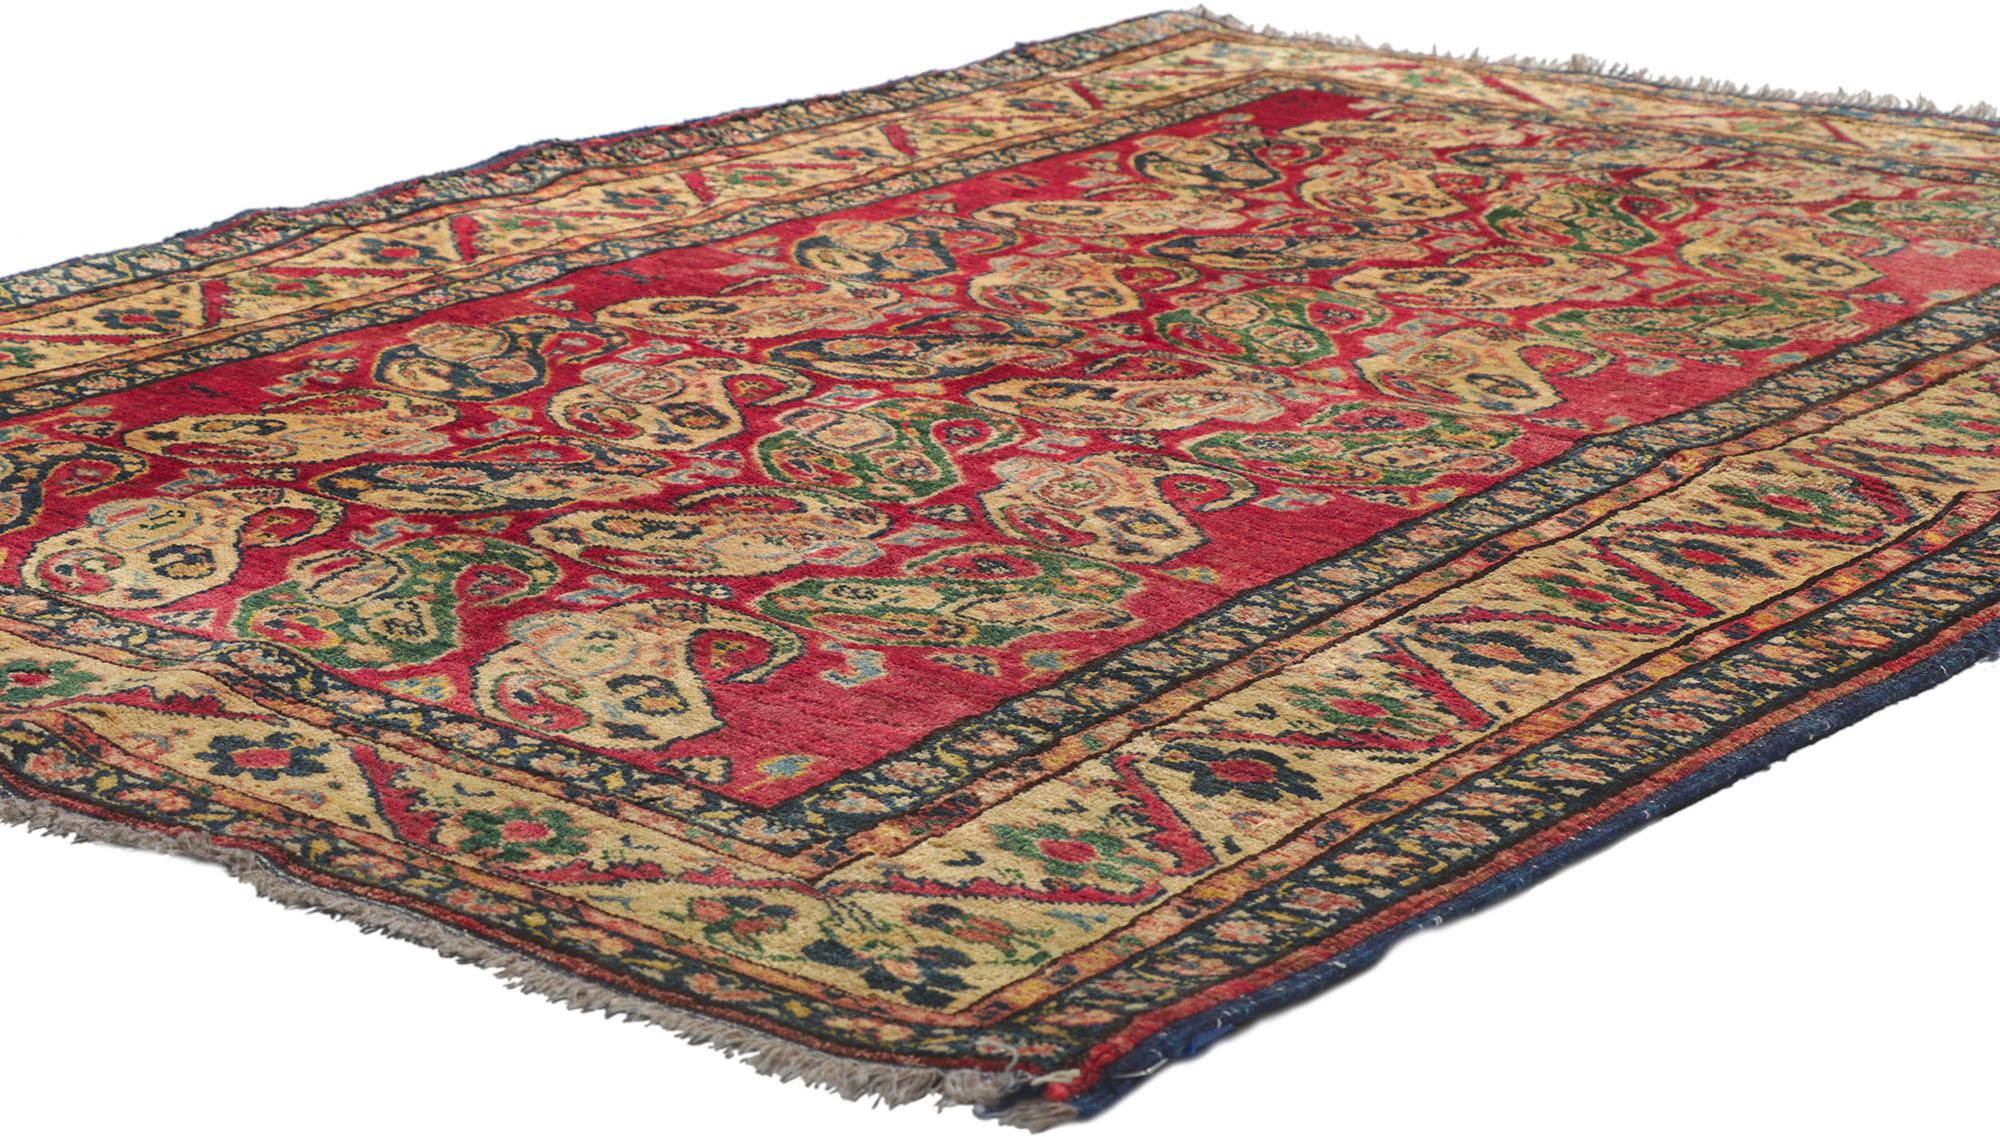 78228 Vintage Afghani Rug, 04'04 x 05'08. This hand-knotted wool vintage Afghani rug features an all-over geometric pattern composed of boteh motifs. Desirable Age Wear. Abrash. Hand-knotted wool. Made in Afghanistan.